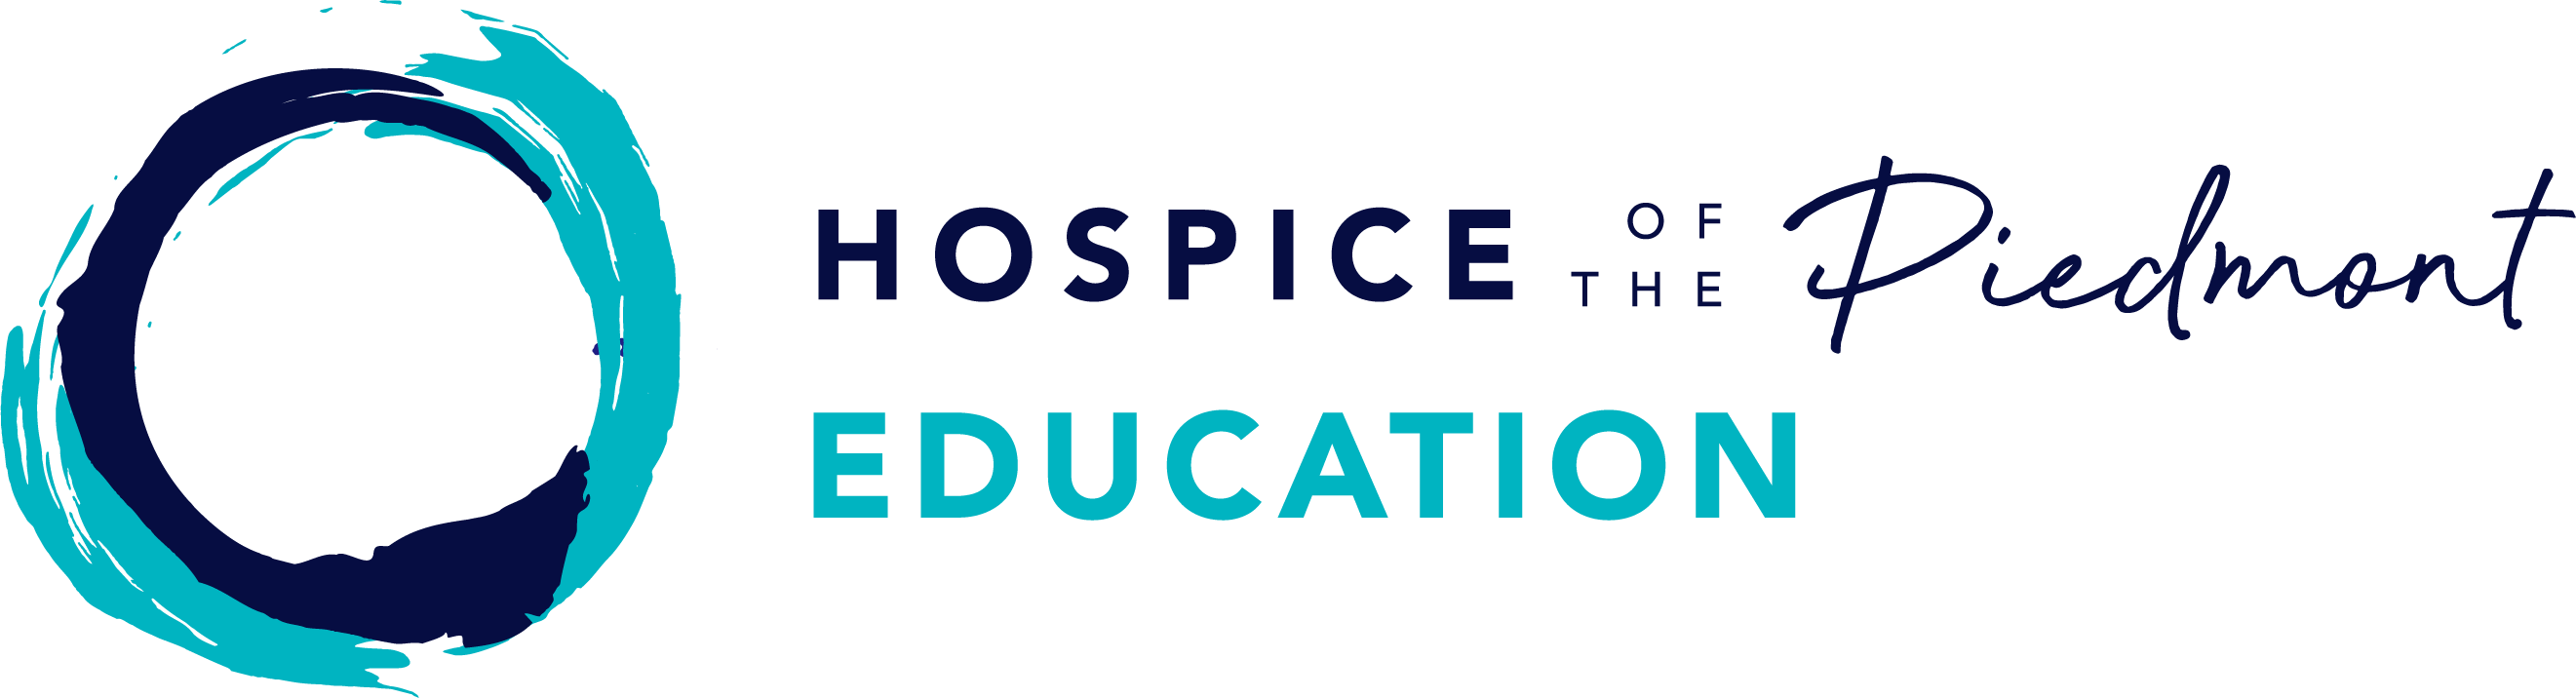 Light blue and dark blue logo with Hospice of the Piedmont Education